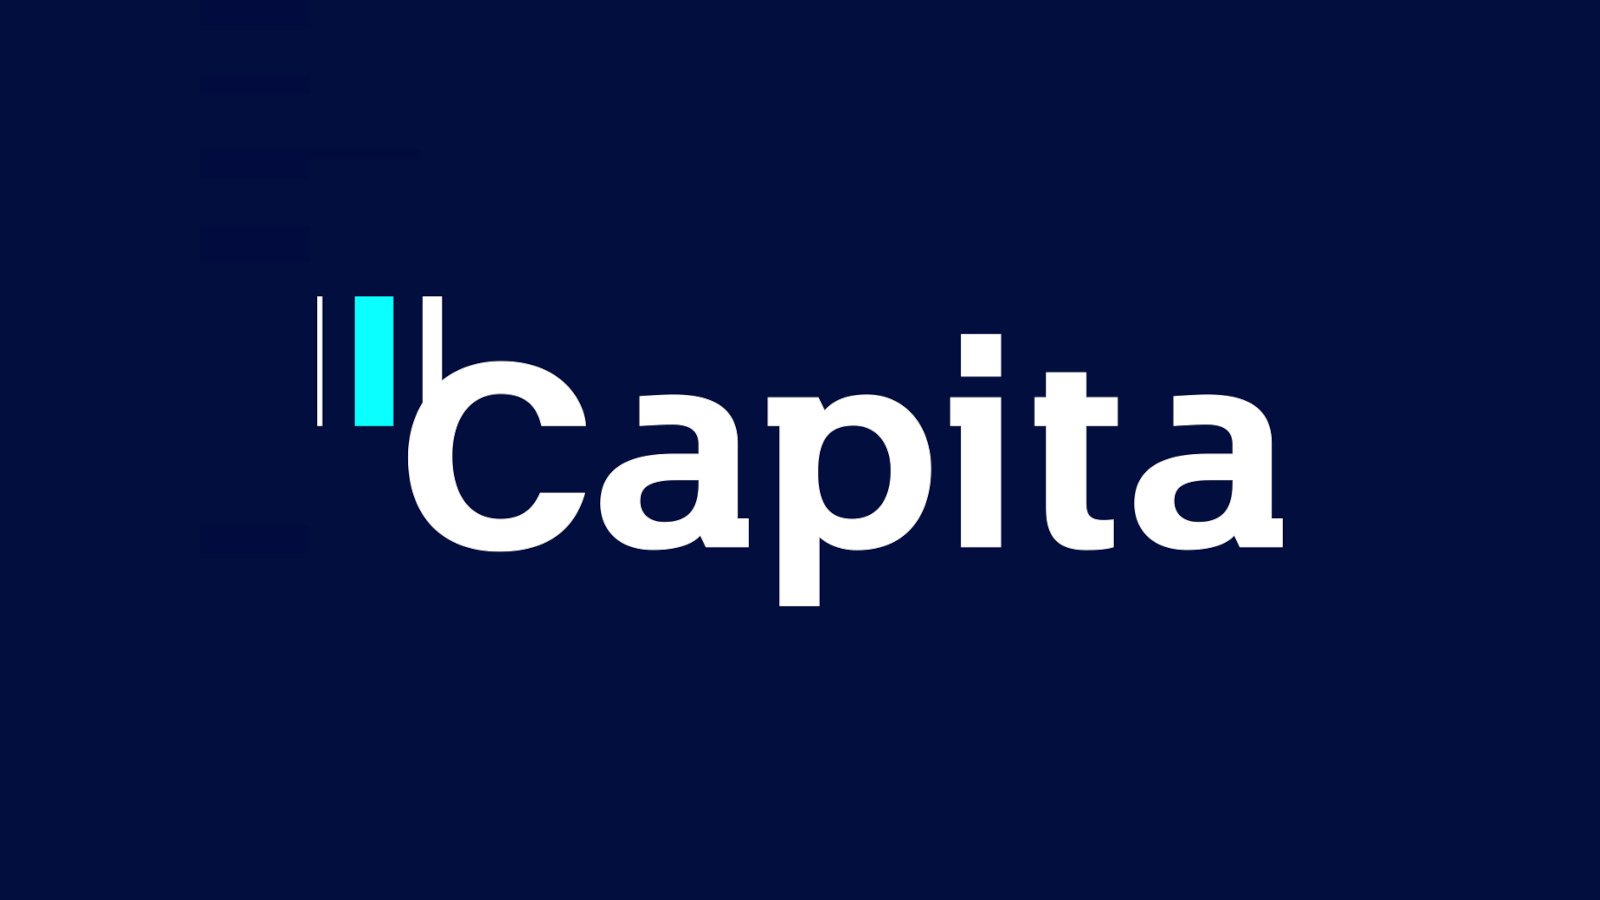 Capita confirms hackers stole data in recent cyberattack